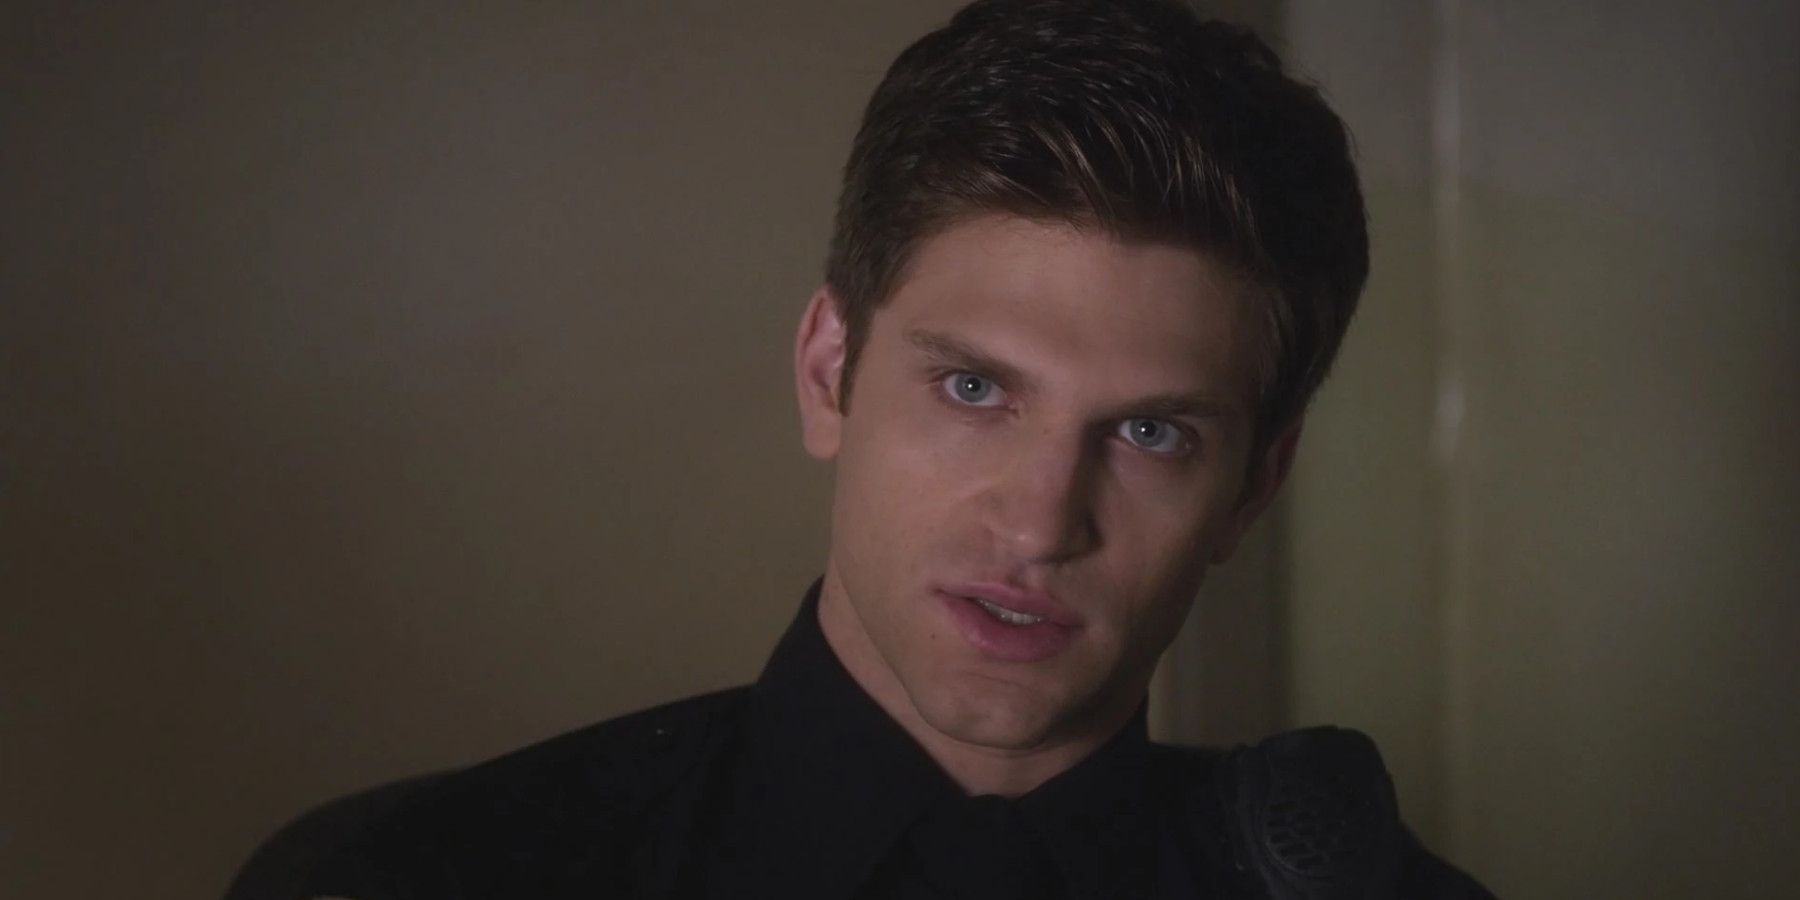 Keegan Allen as Tobey Kavanaugh mysteriously watches Pretty Little Liars